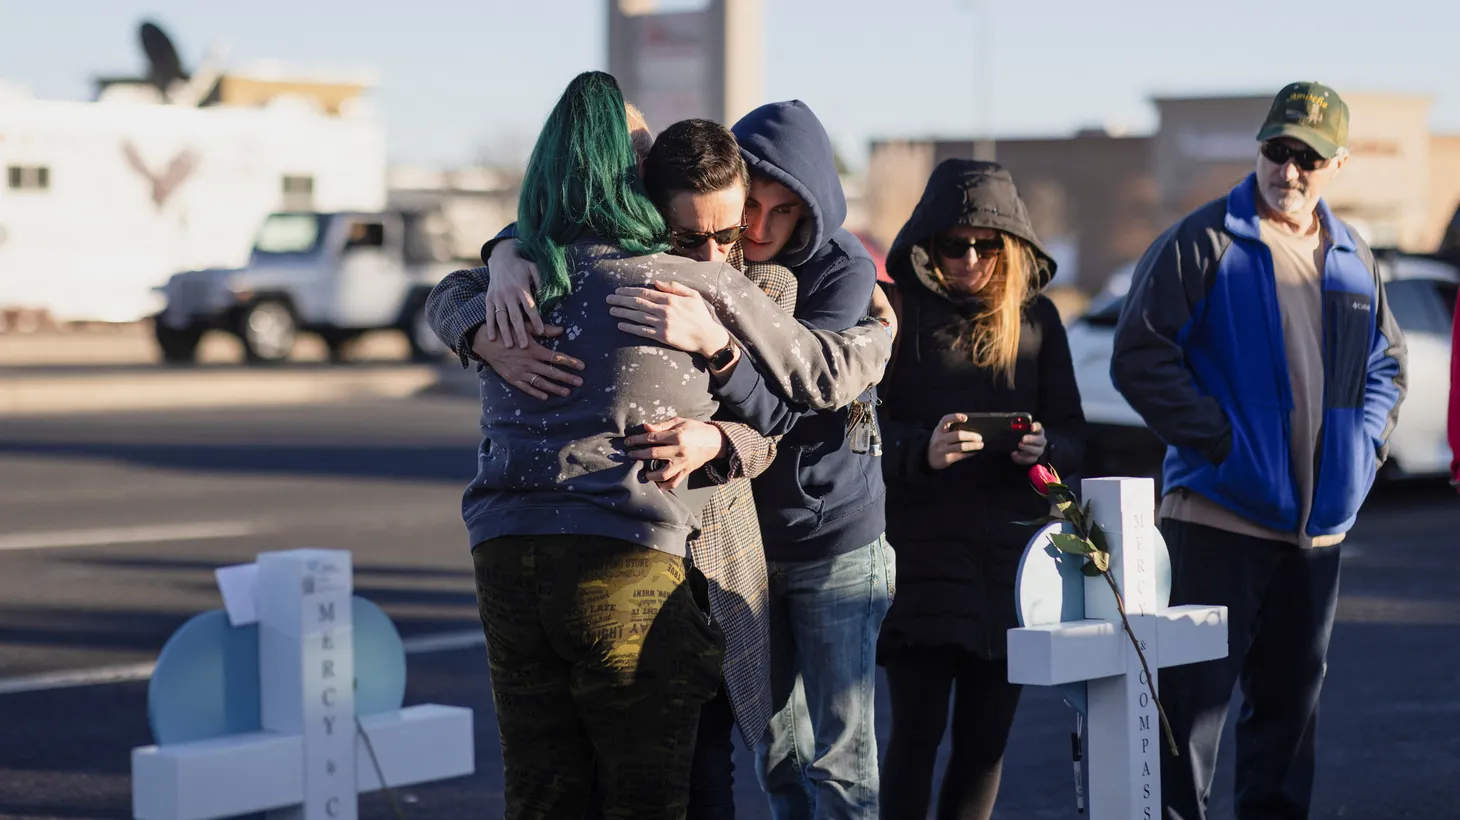 Matthew Ward is embraced by Taylor Sunderman and Alex Gallagher at a memorial for the victims of a mass shooting at LGBTQ nightclub Club Q, in Colorado Springs, Colorado, U.S. November 21, 2022.